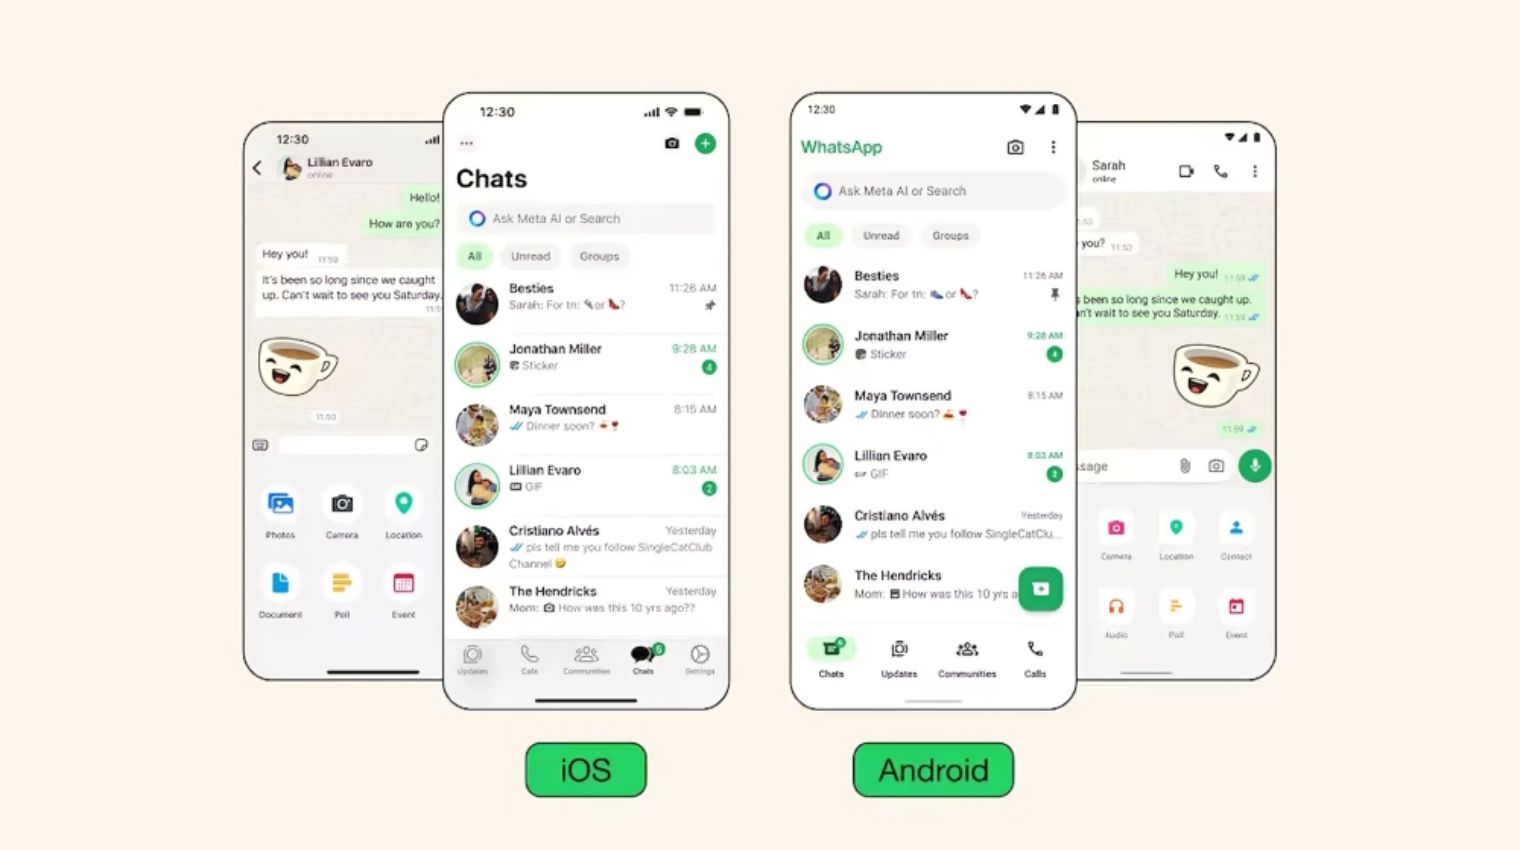 “WhatsApp Unveils Sleek New Design for iOS and Android Users”